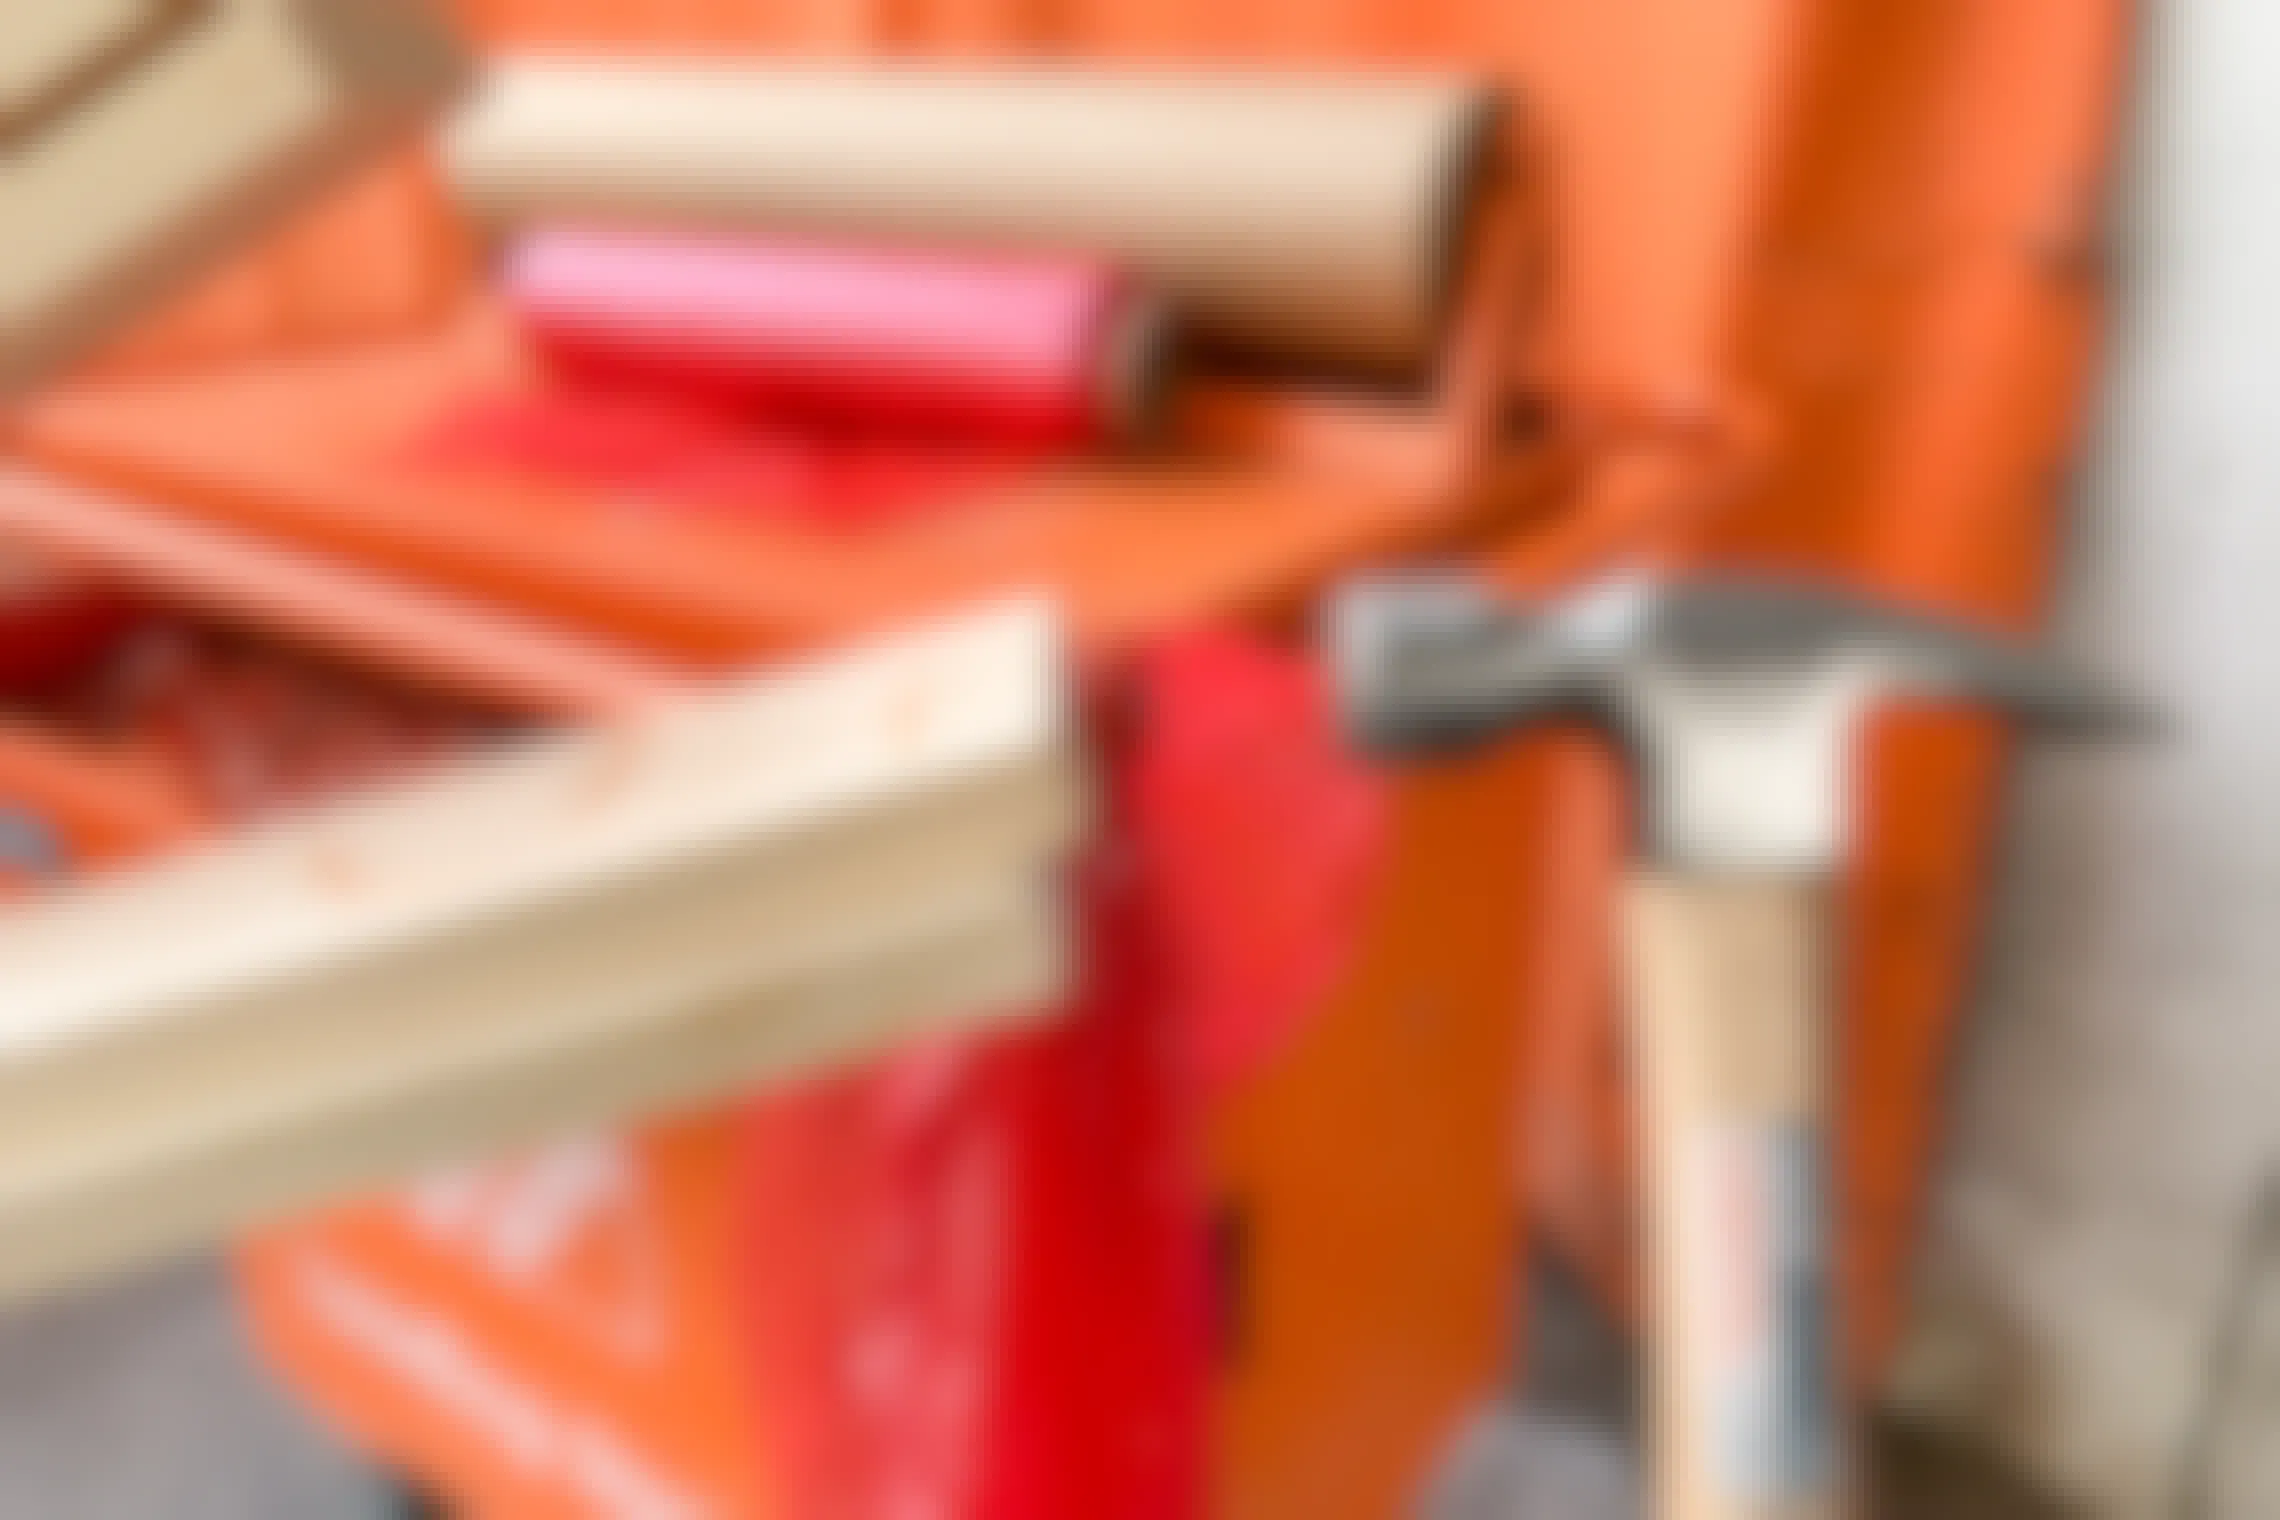 Free Home Depot Workshops and 10 Other Things You Can Get for Free